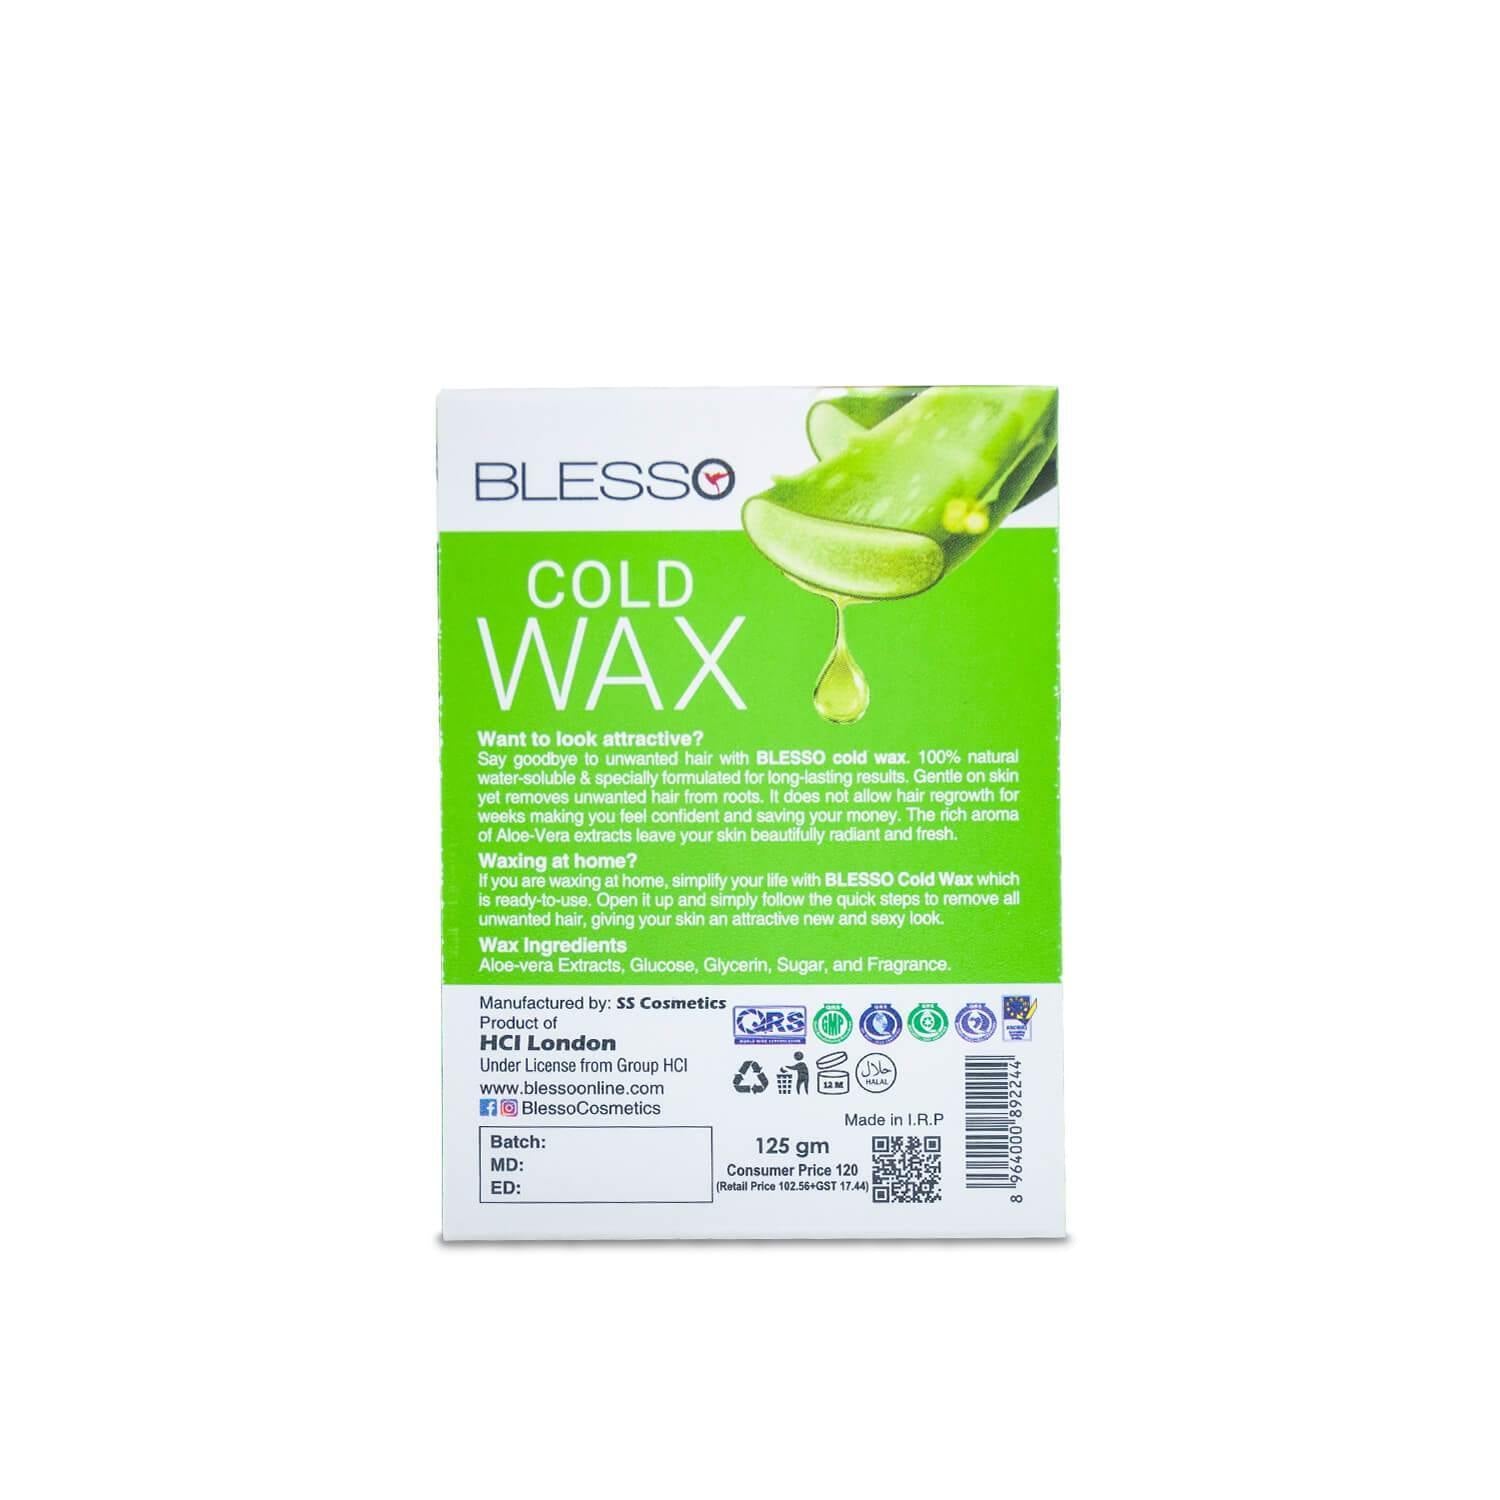 Blesso Cold Wax with Aleo Vera Extract - Blesso Cosmetics